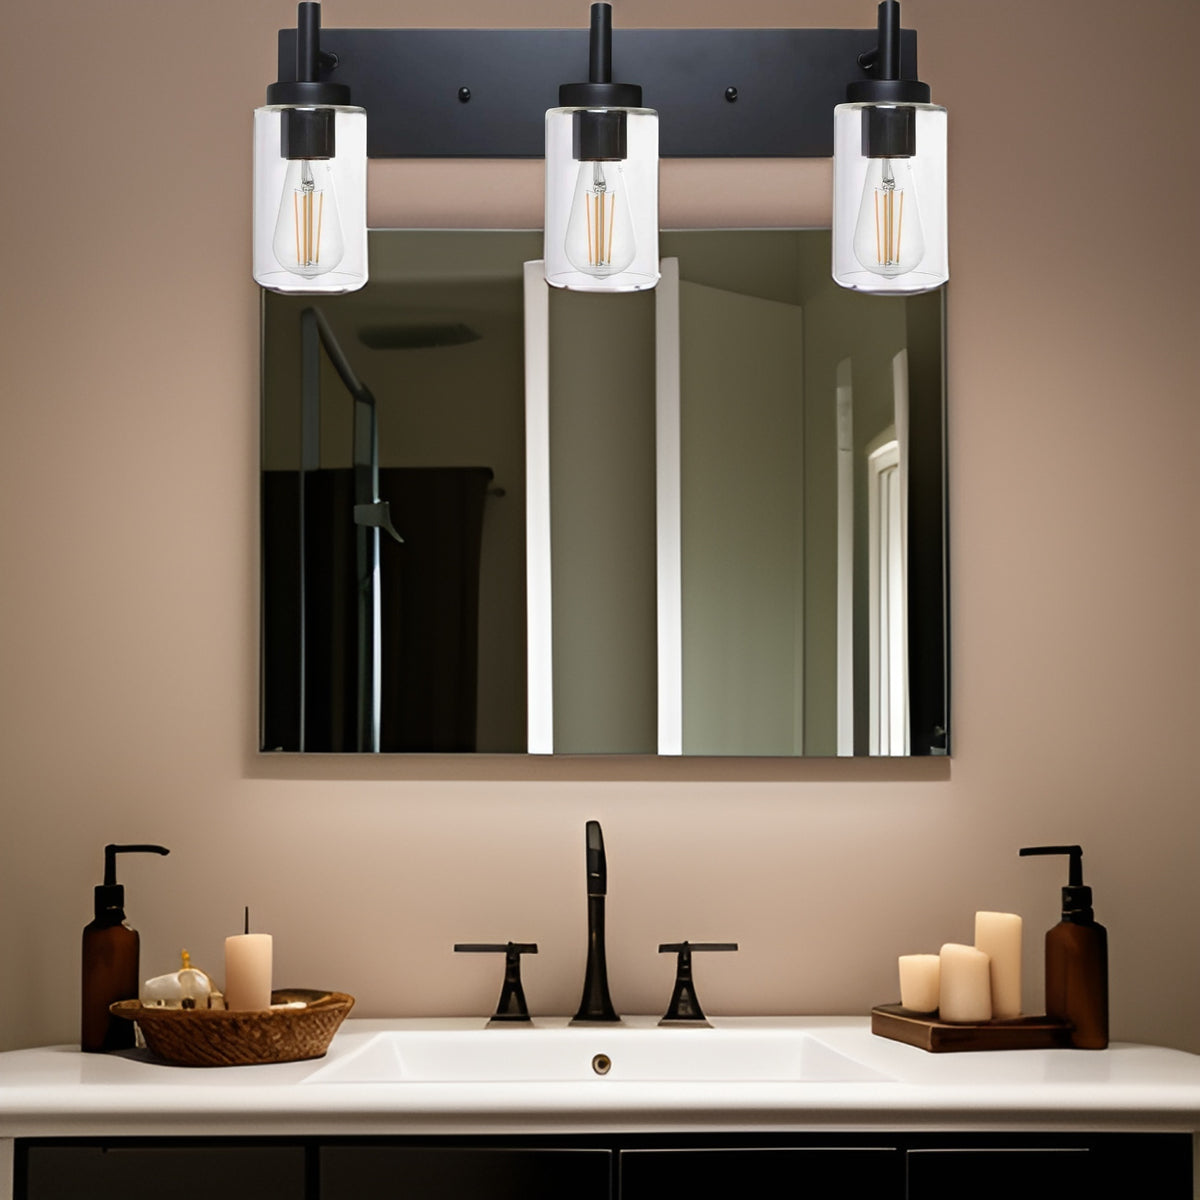 Vanity Bathroom Light Fixture Black 3 Lights Rustic Wall Sconce Lighting with Clear Glass Shade